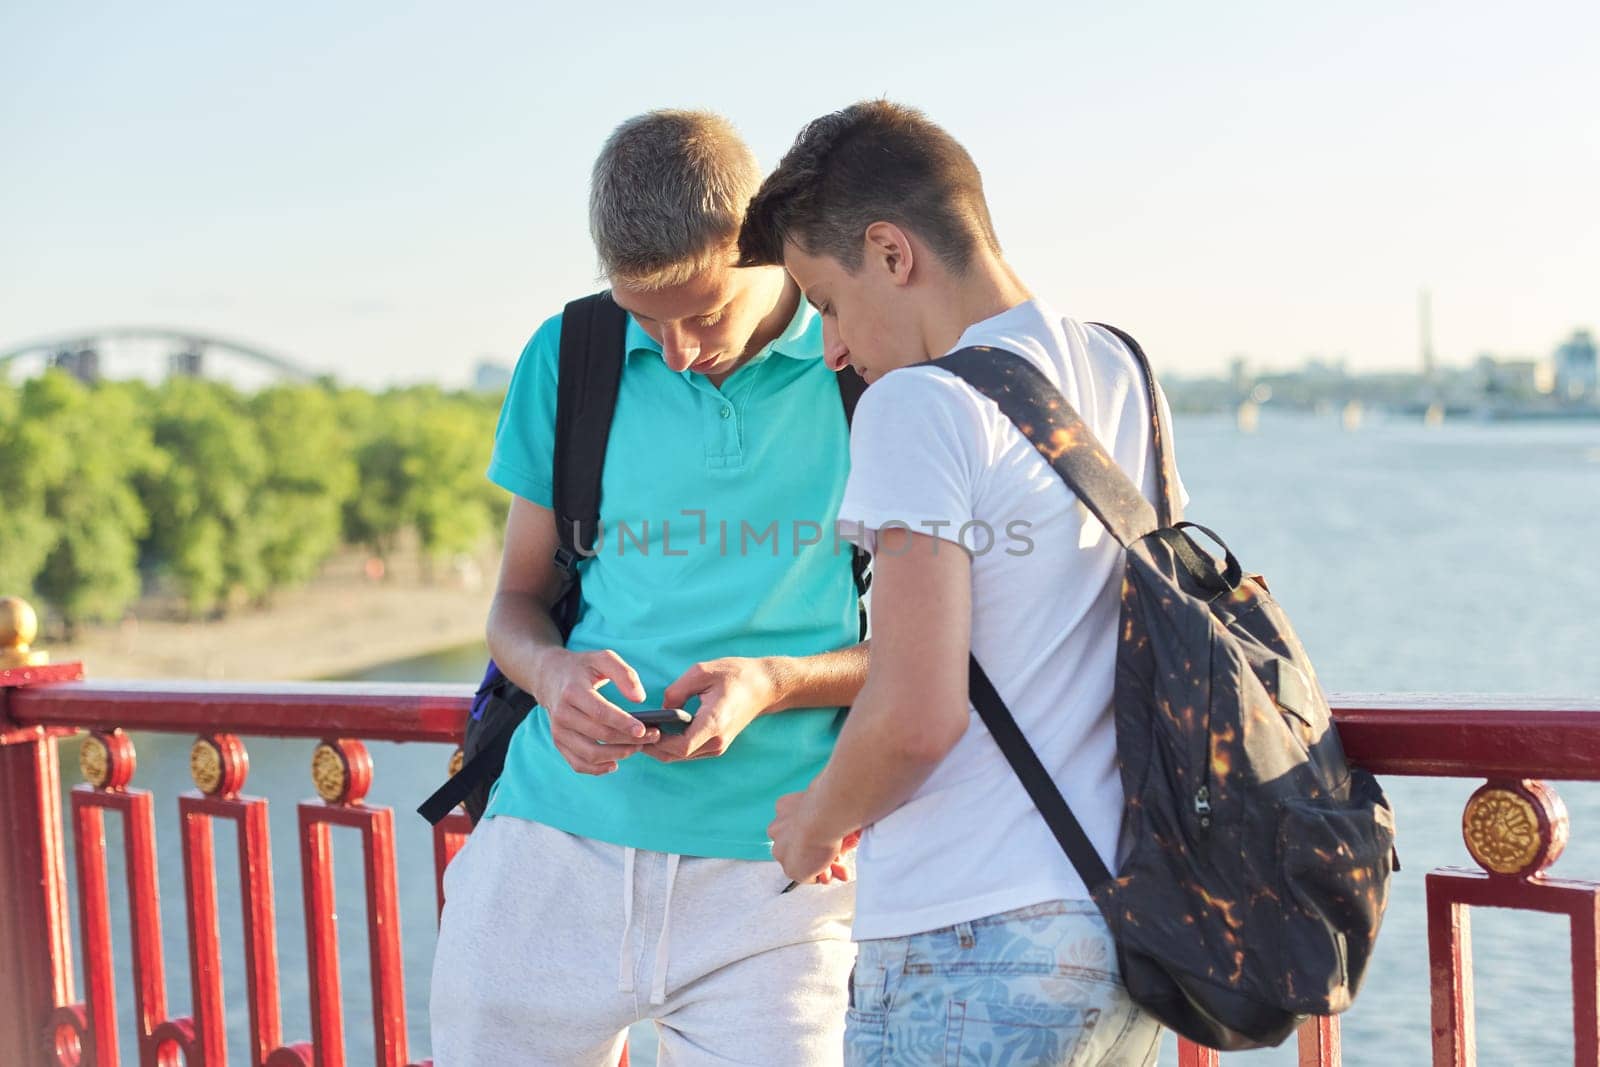 Two friends teenage boys using smartphone, talking and smiling, outdoor summer day, sunset on the bridge